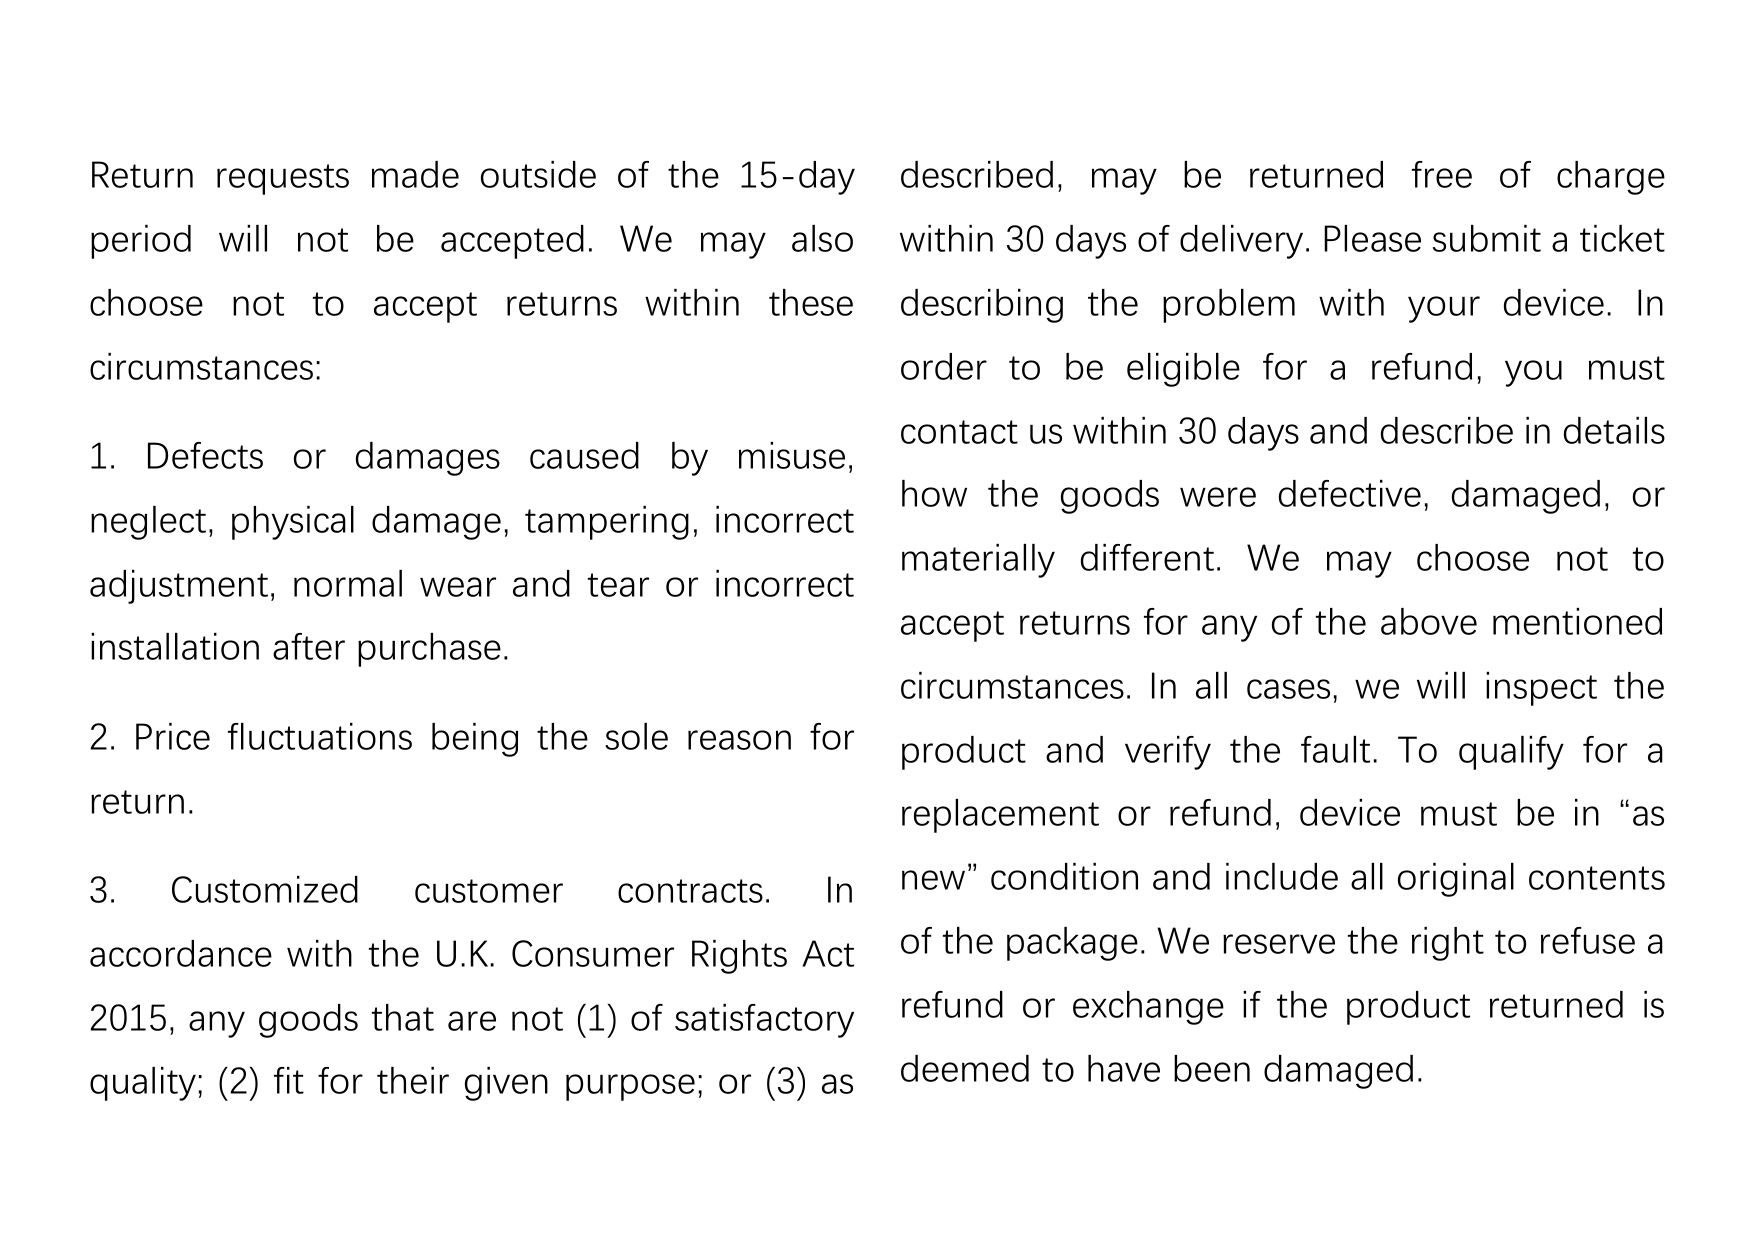 Return requests made outside of the 15-daydescribed, may be returned free of chargeperiod will not be accepted. We may alsowithi